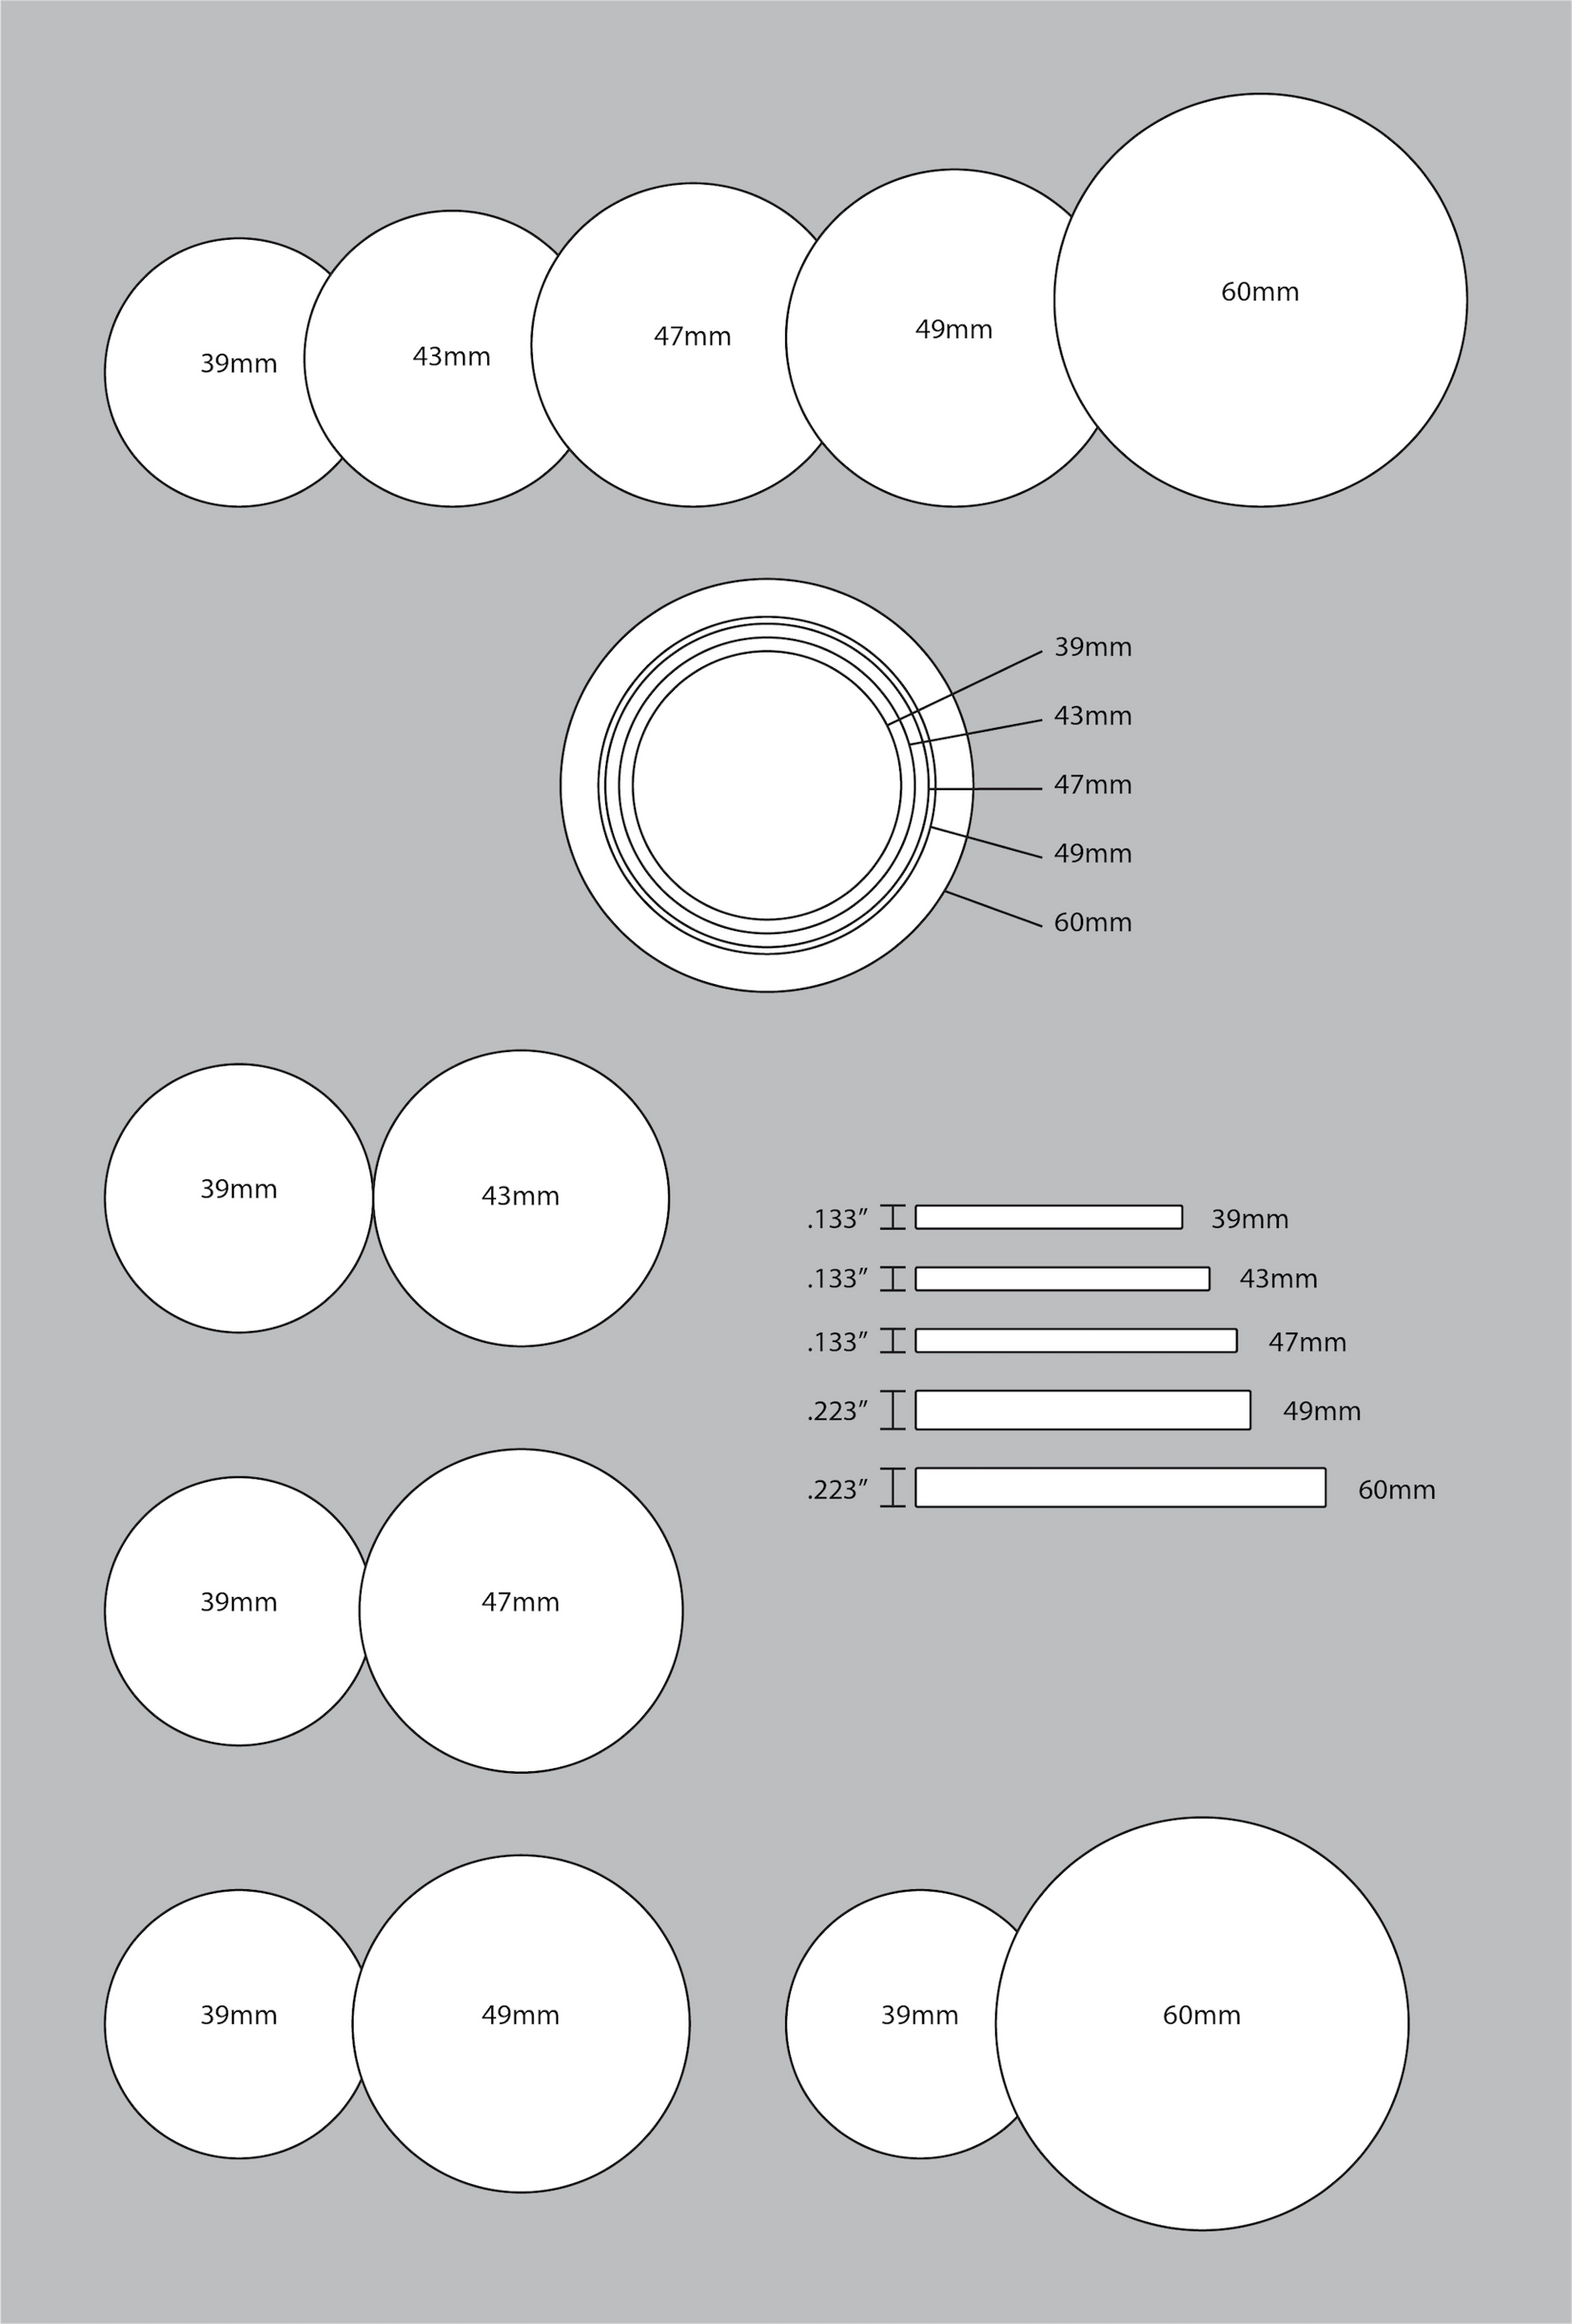 Check out Aurora Poker Gear's free Poker Chip Size Comparison Diagram. This chart shows the new poker player everything they need to know about poker chip sizing. Compare official poker chip diameters and poker chip thicknesses, as well as dimensions for our rebuy chips, bounty chips, and dealer buttons.